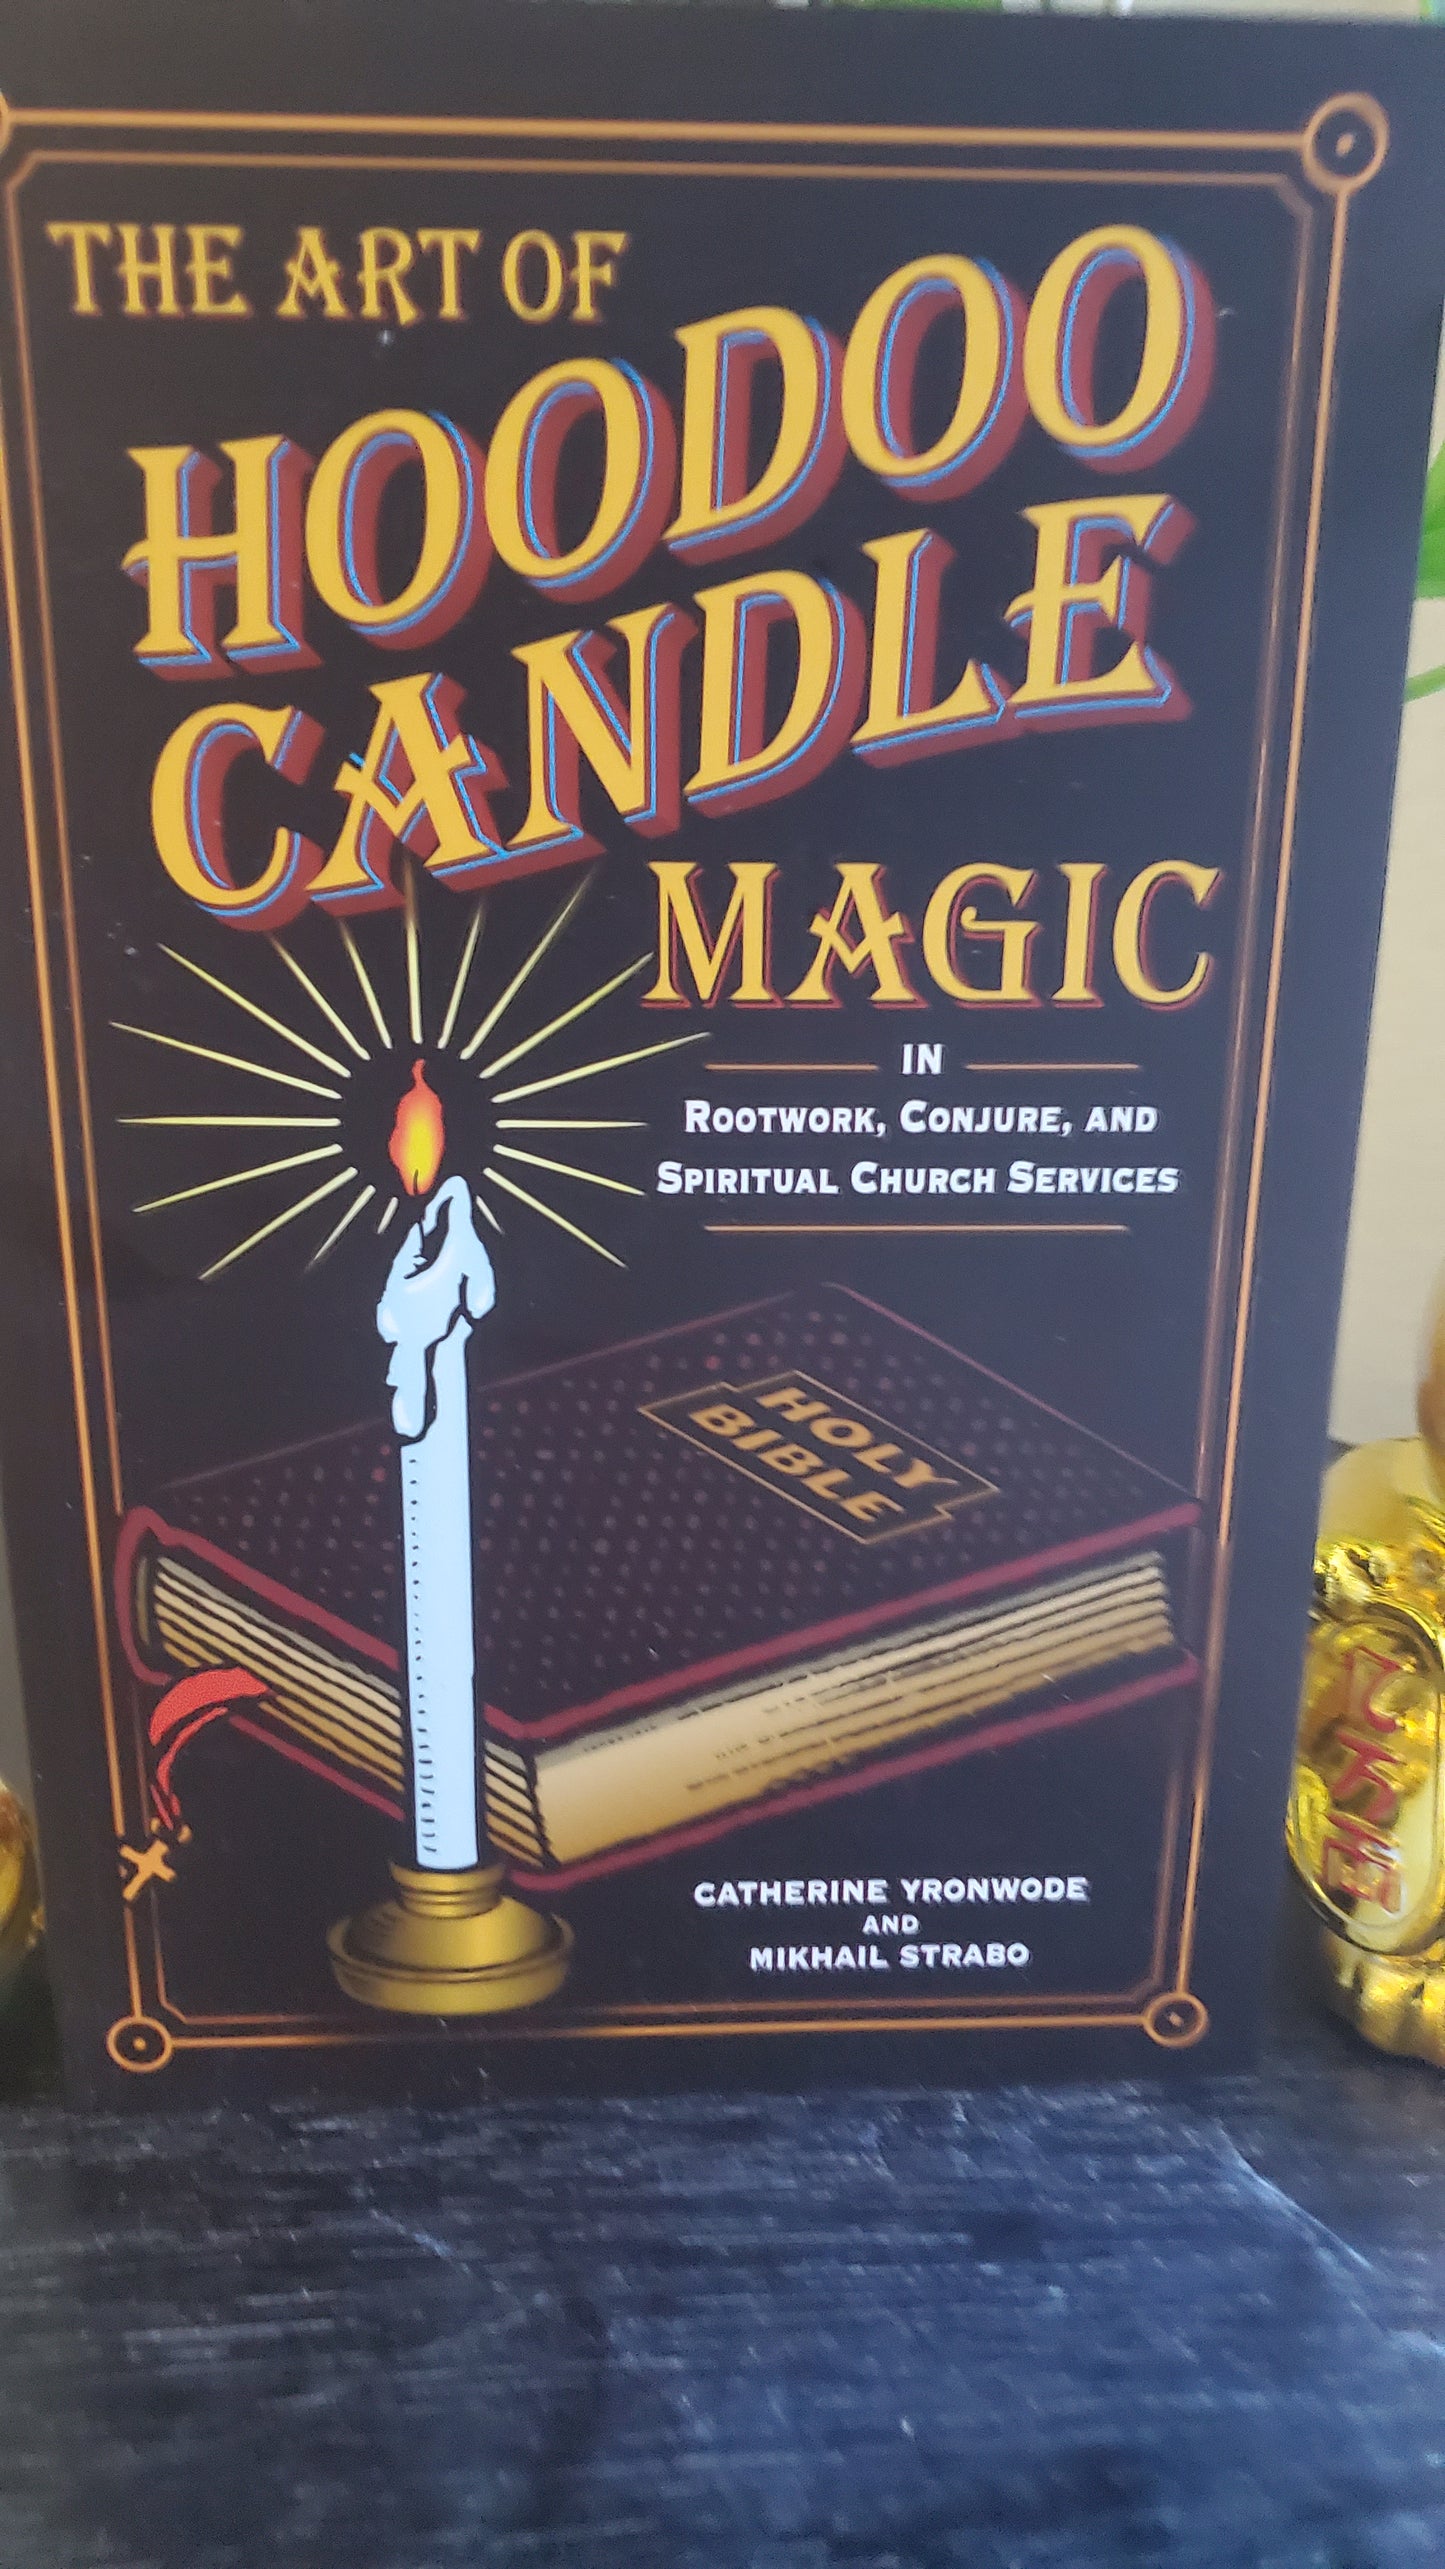 The Art of Hoodoo Candle Magic in Rootwork, Conjure, and Spiritual Church Services By Catherine Yronwode **POWERFUL BUY** Great Read!!!